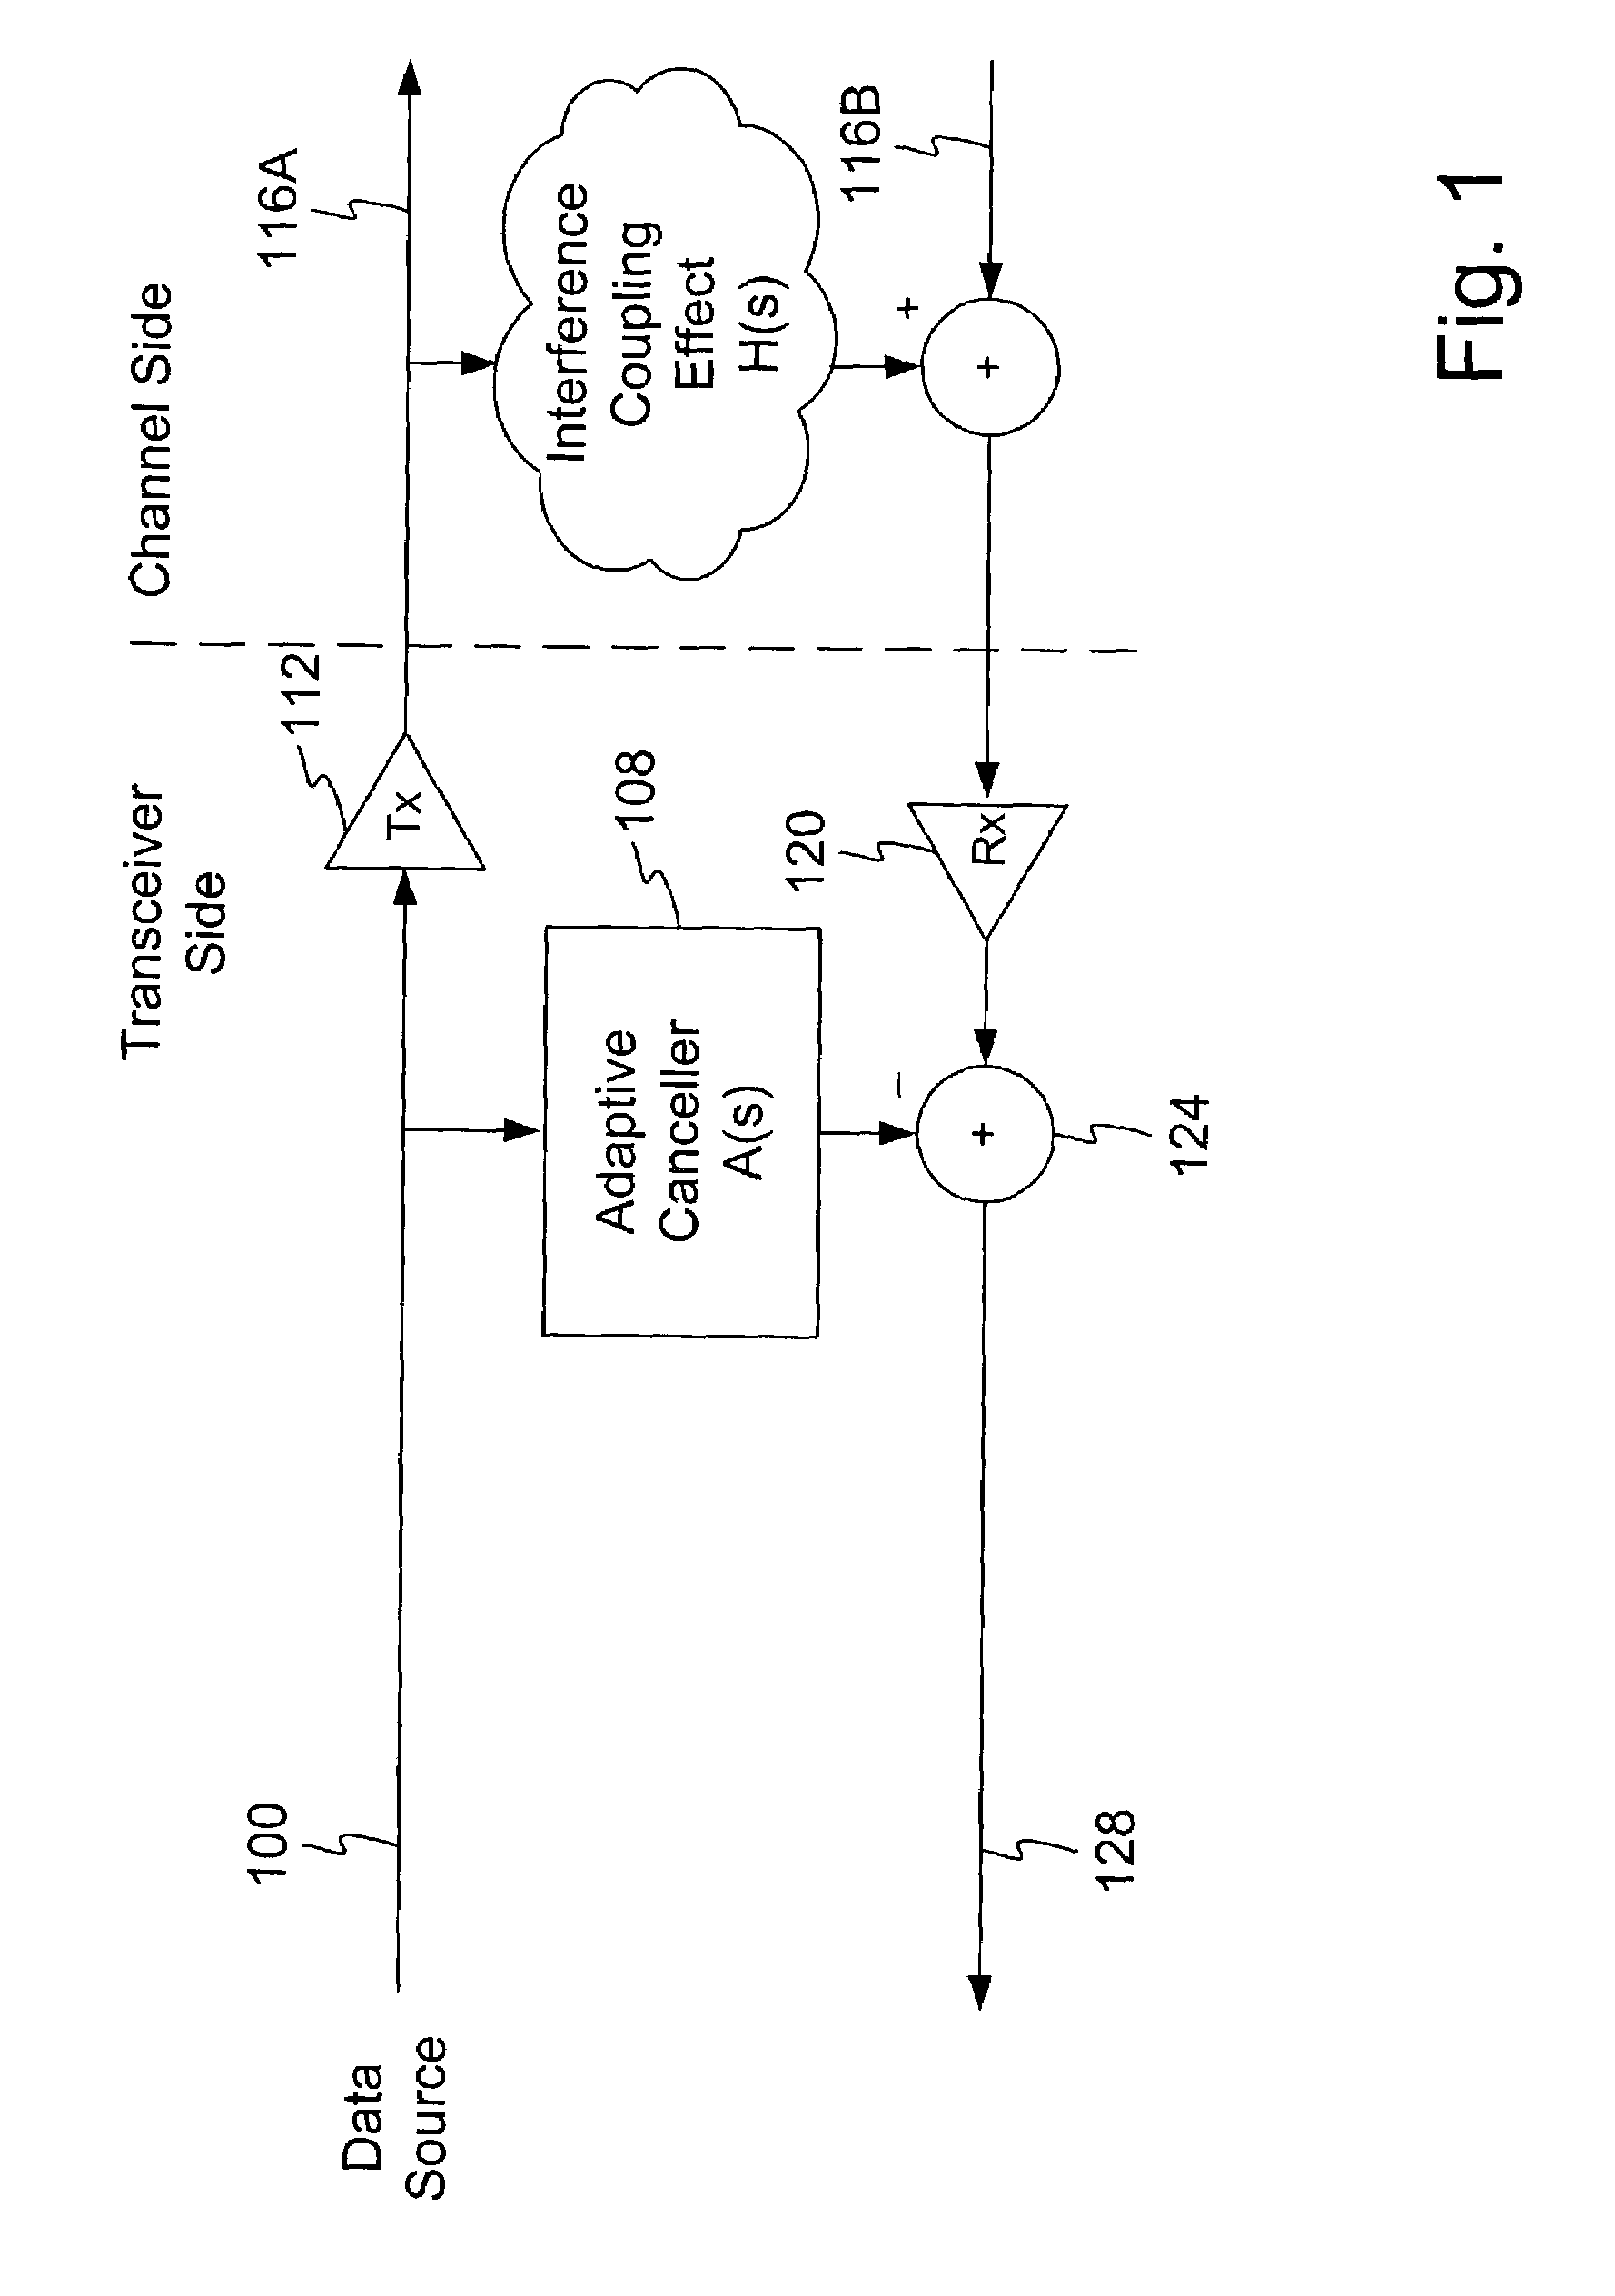 Multiple channel interference cancellation